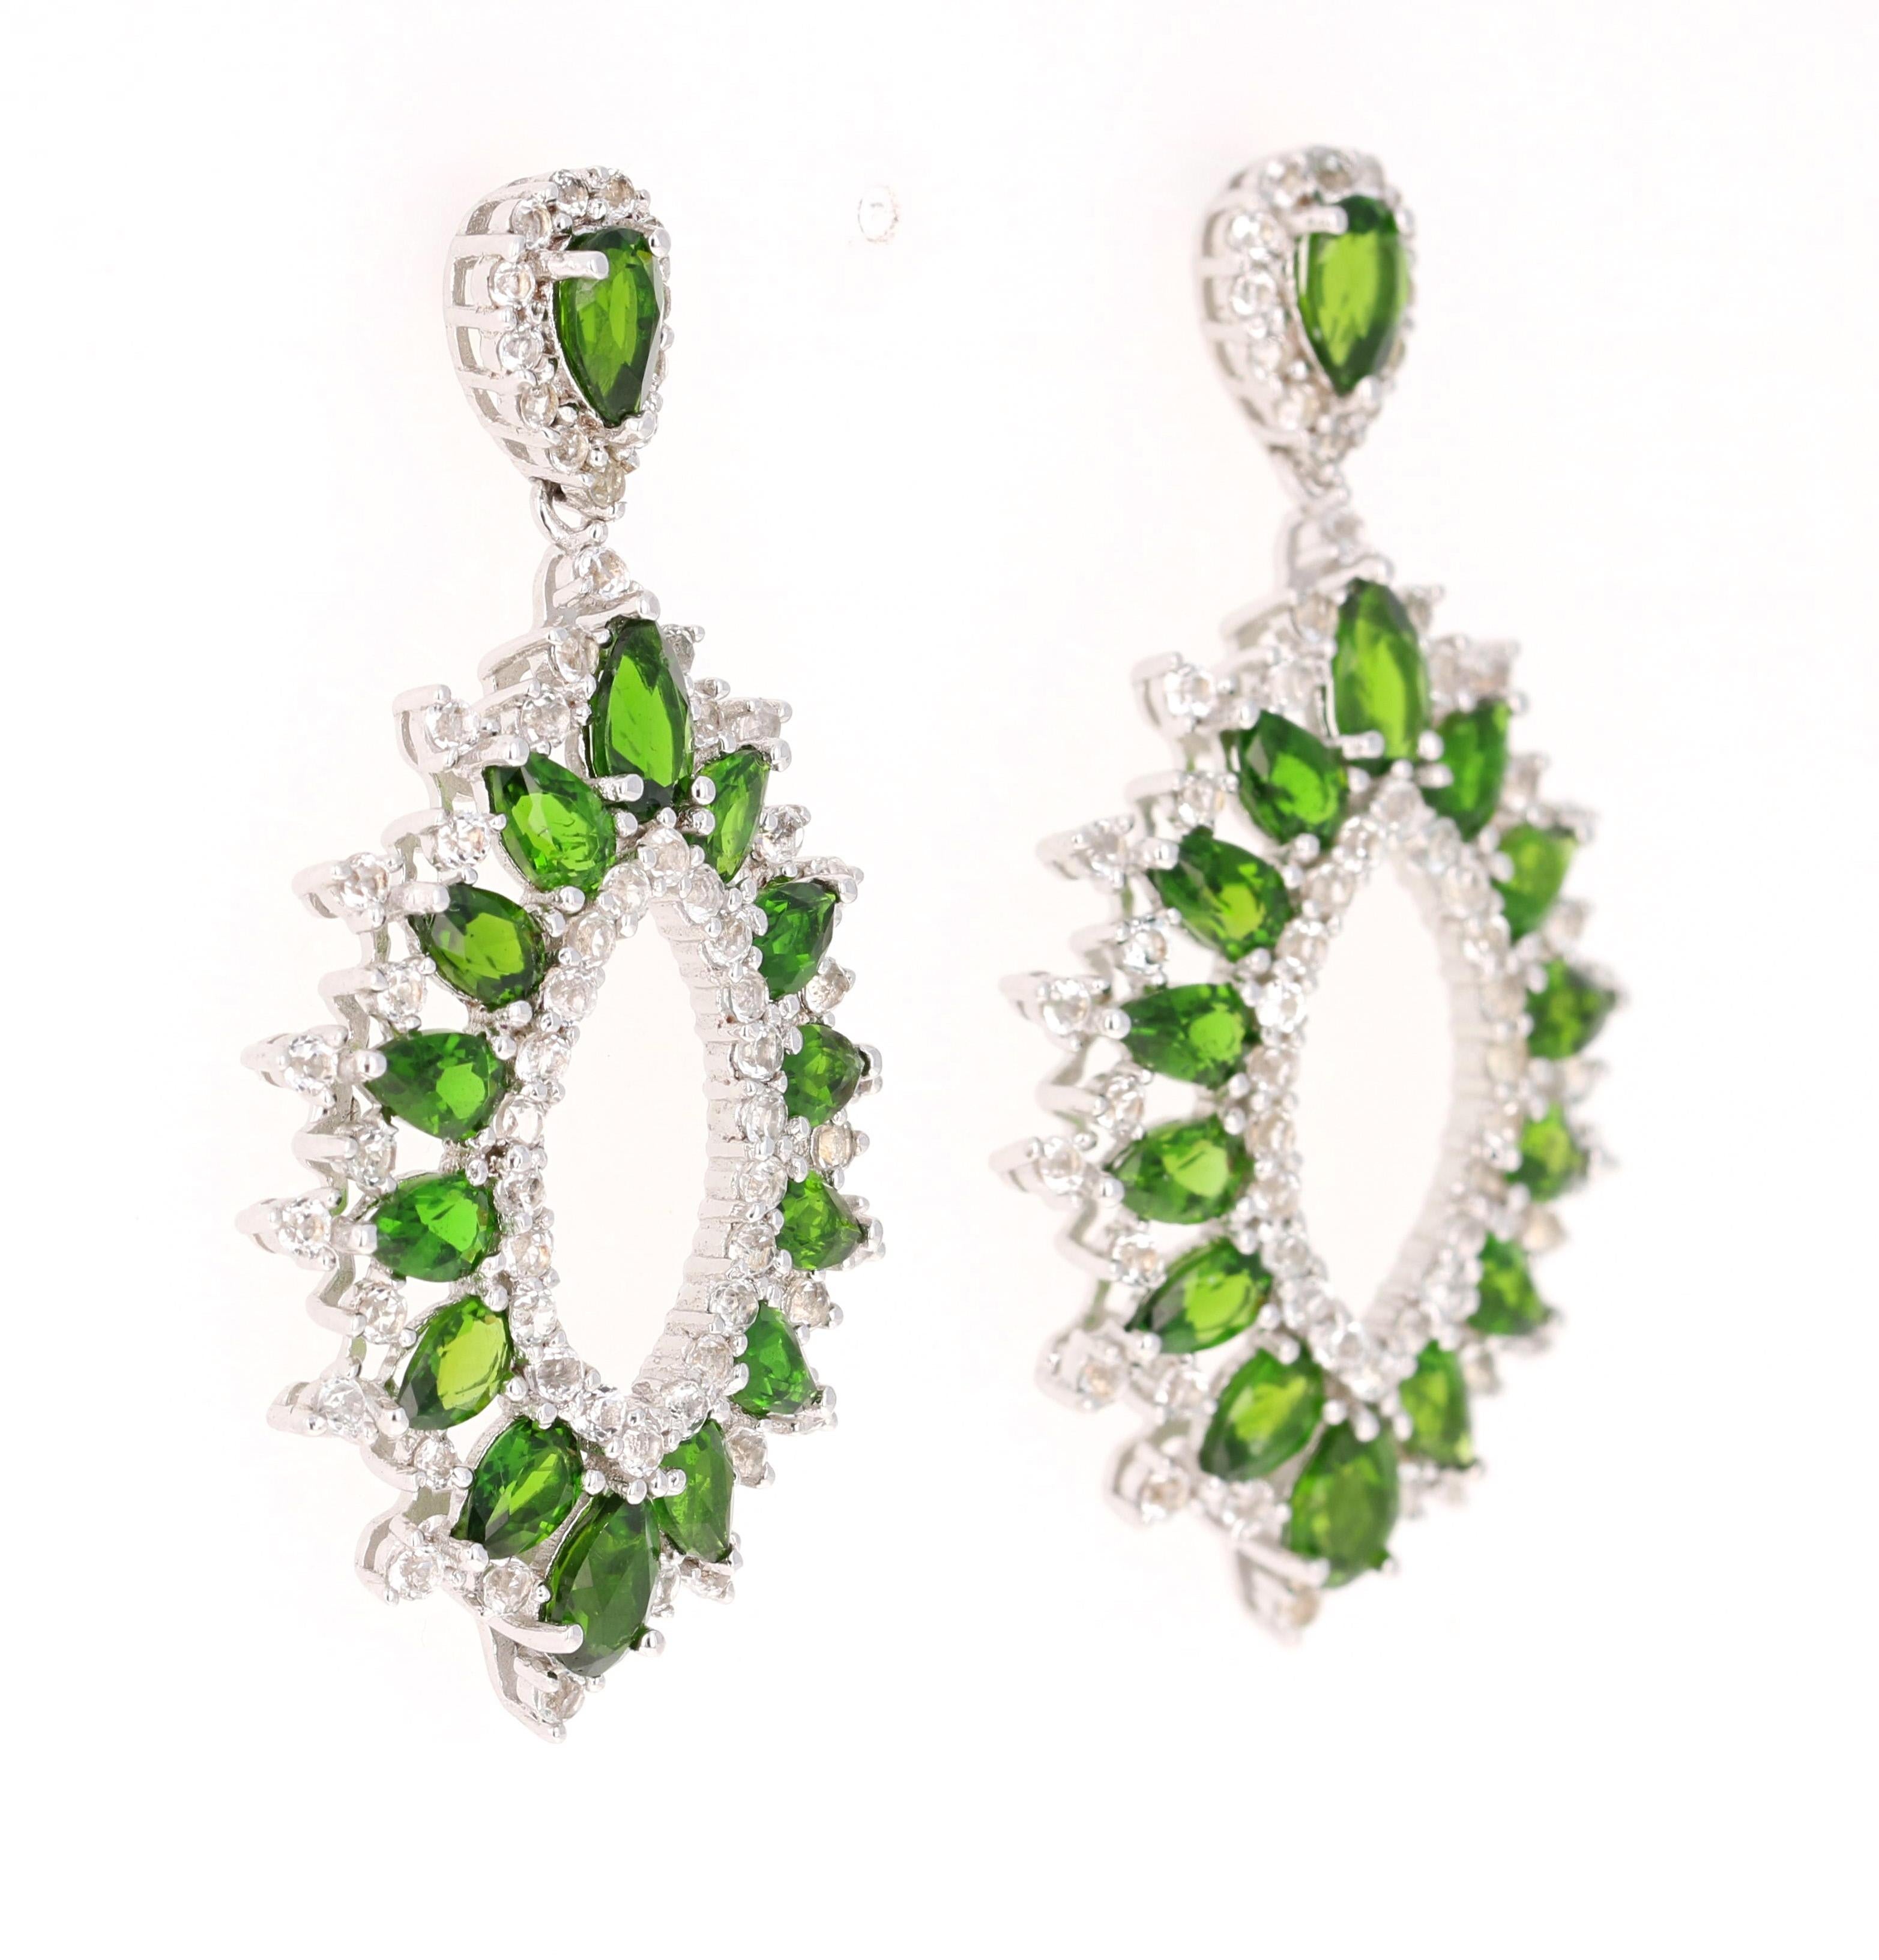 Stunning Dangle Earrings 

These earrings have 7.00 Carats of Chrome Diopside and White Topaz

They are beautifully curated in 925 Silver

They are 1.75 inches long. 
